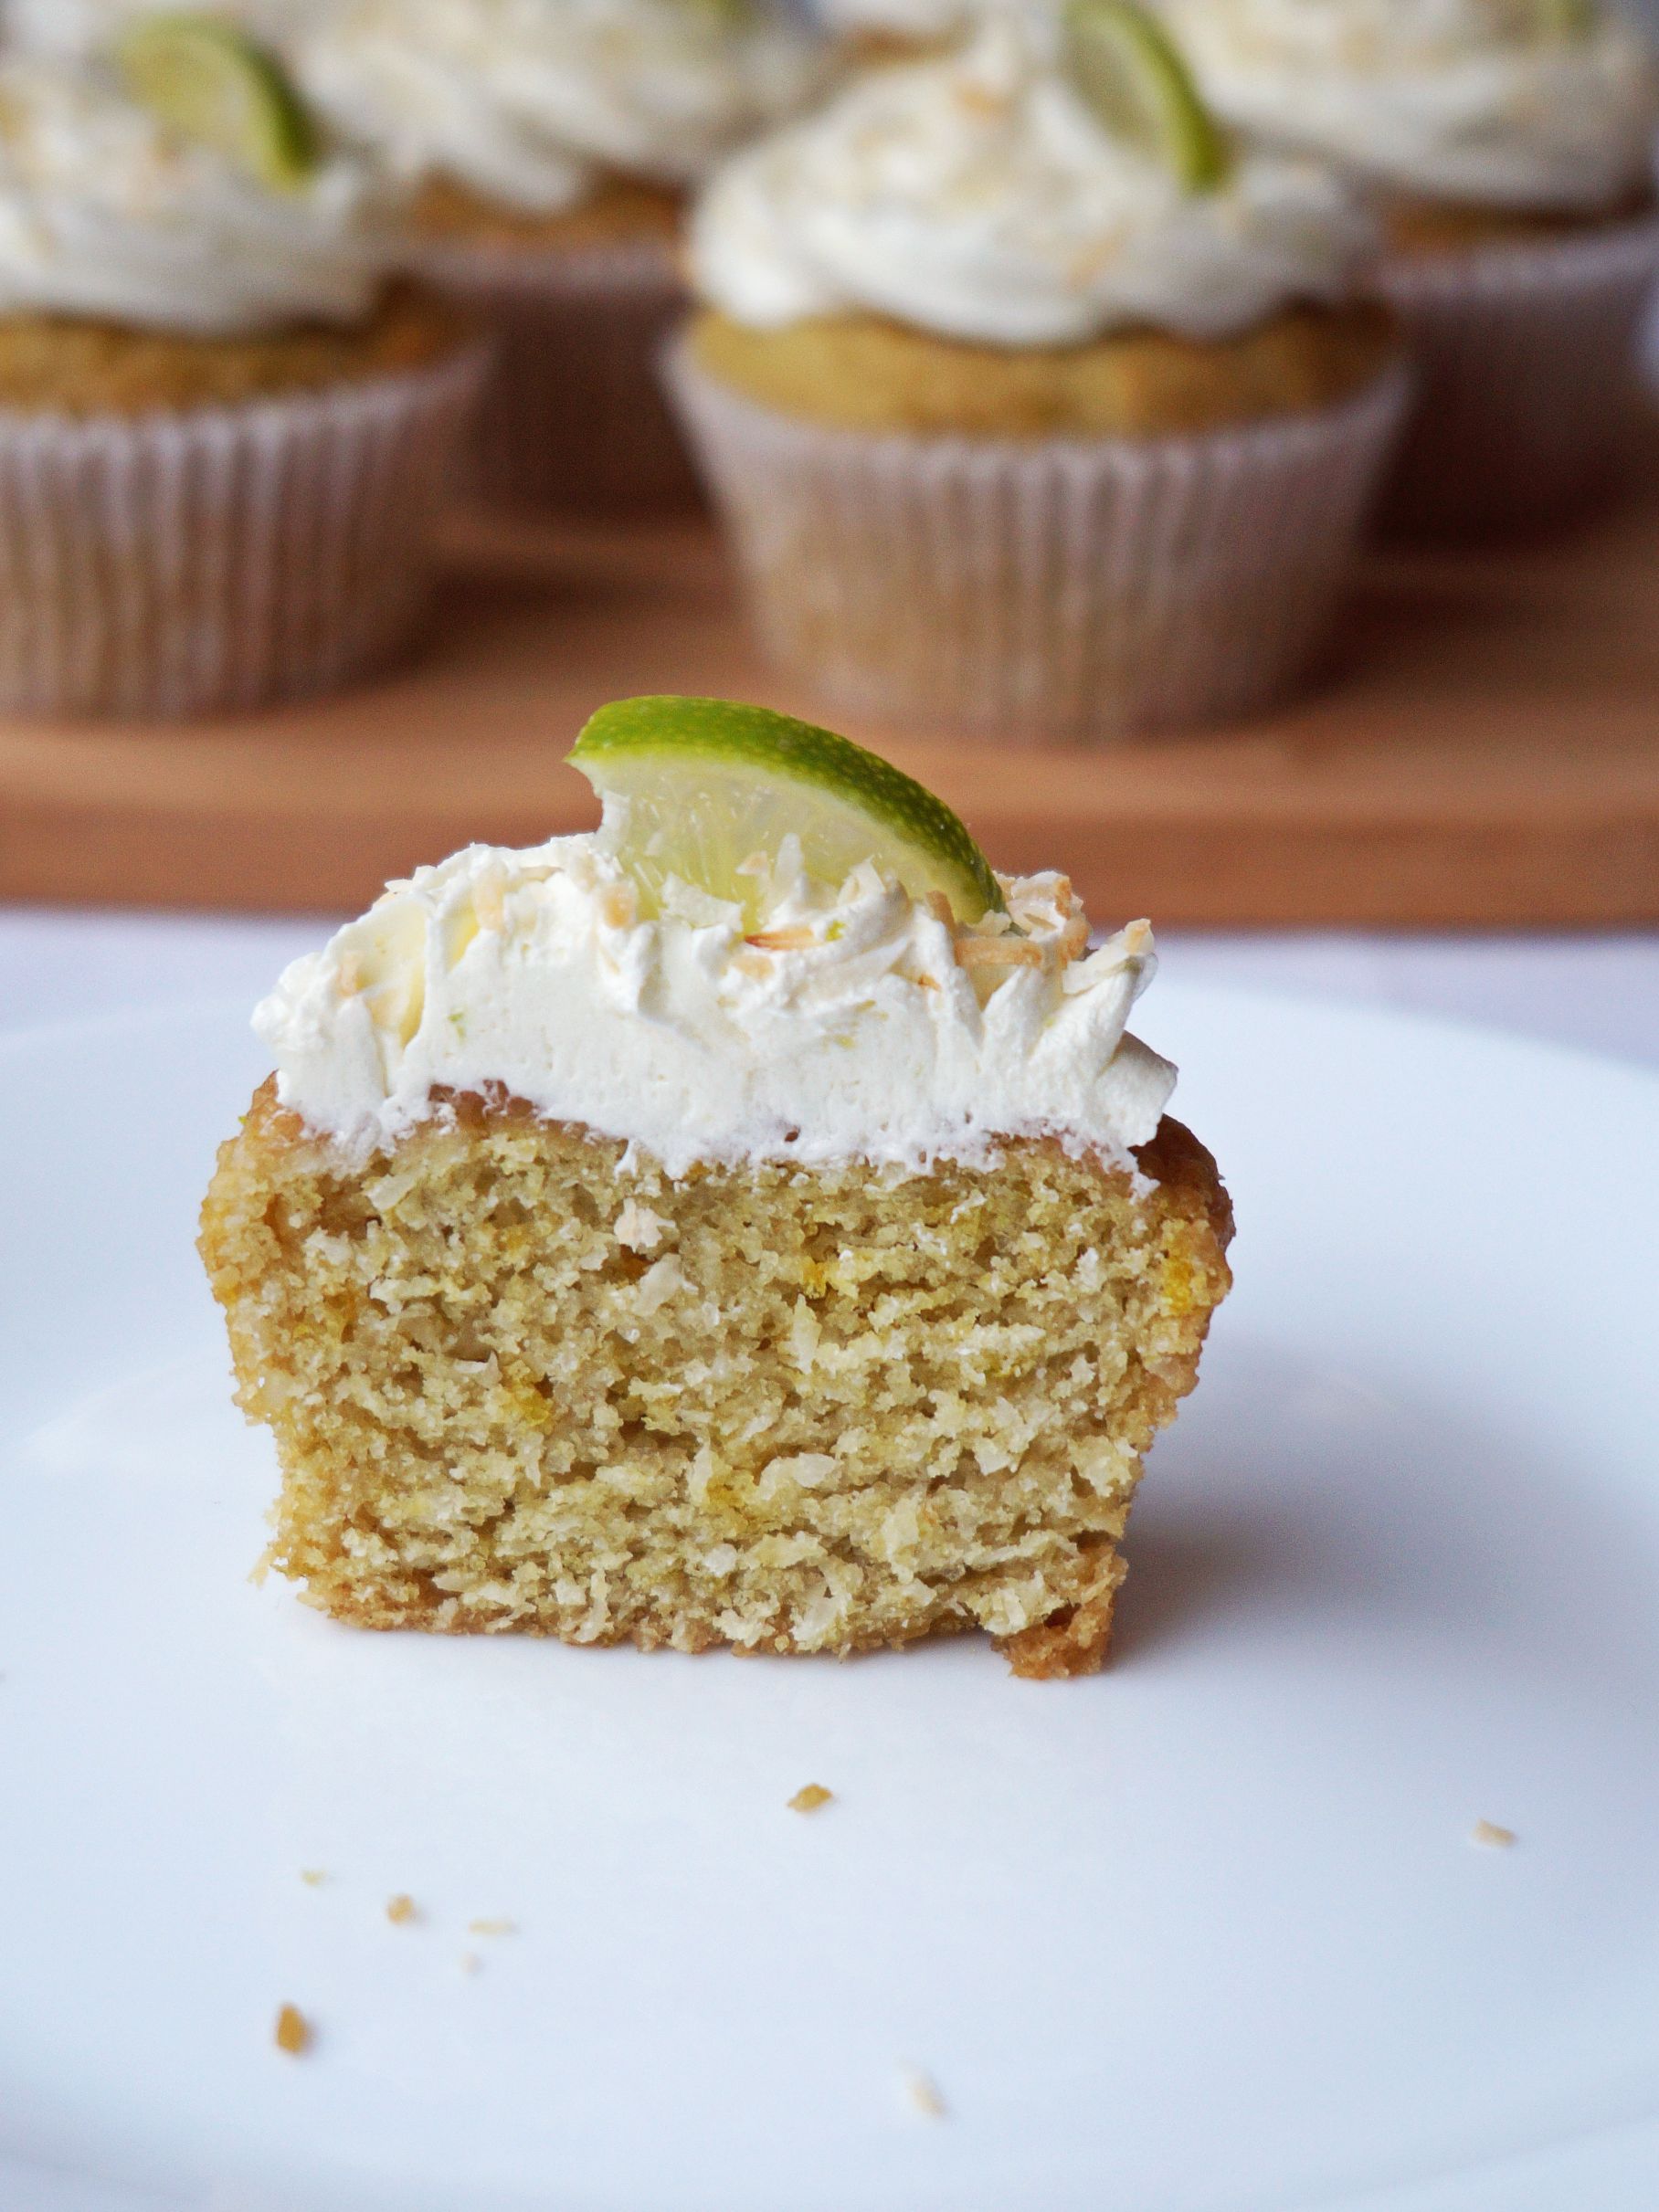 Gluten-free Lime and Coconut Cupcakes